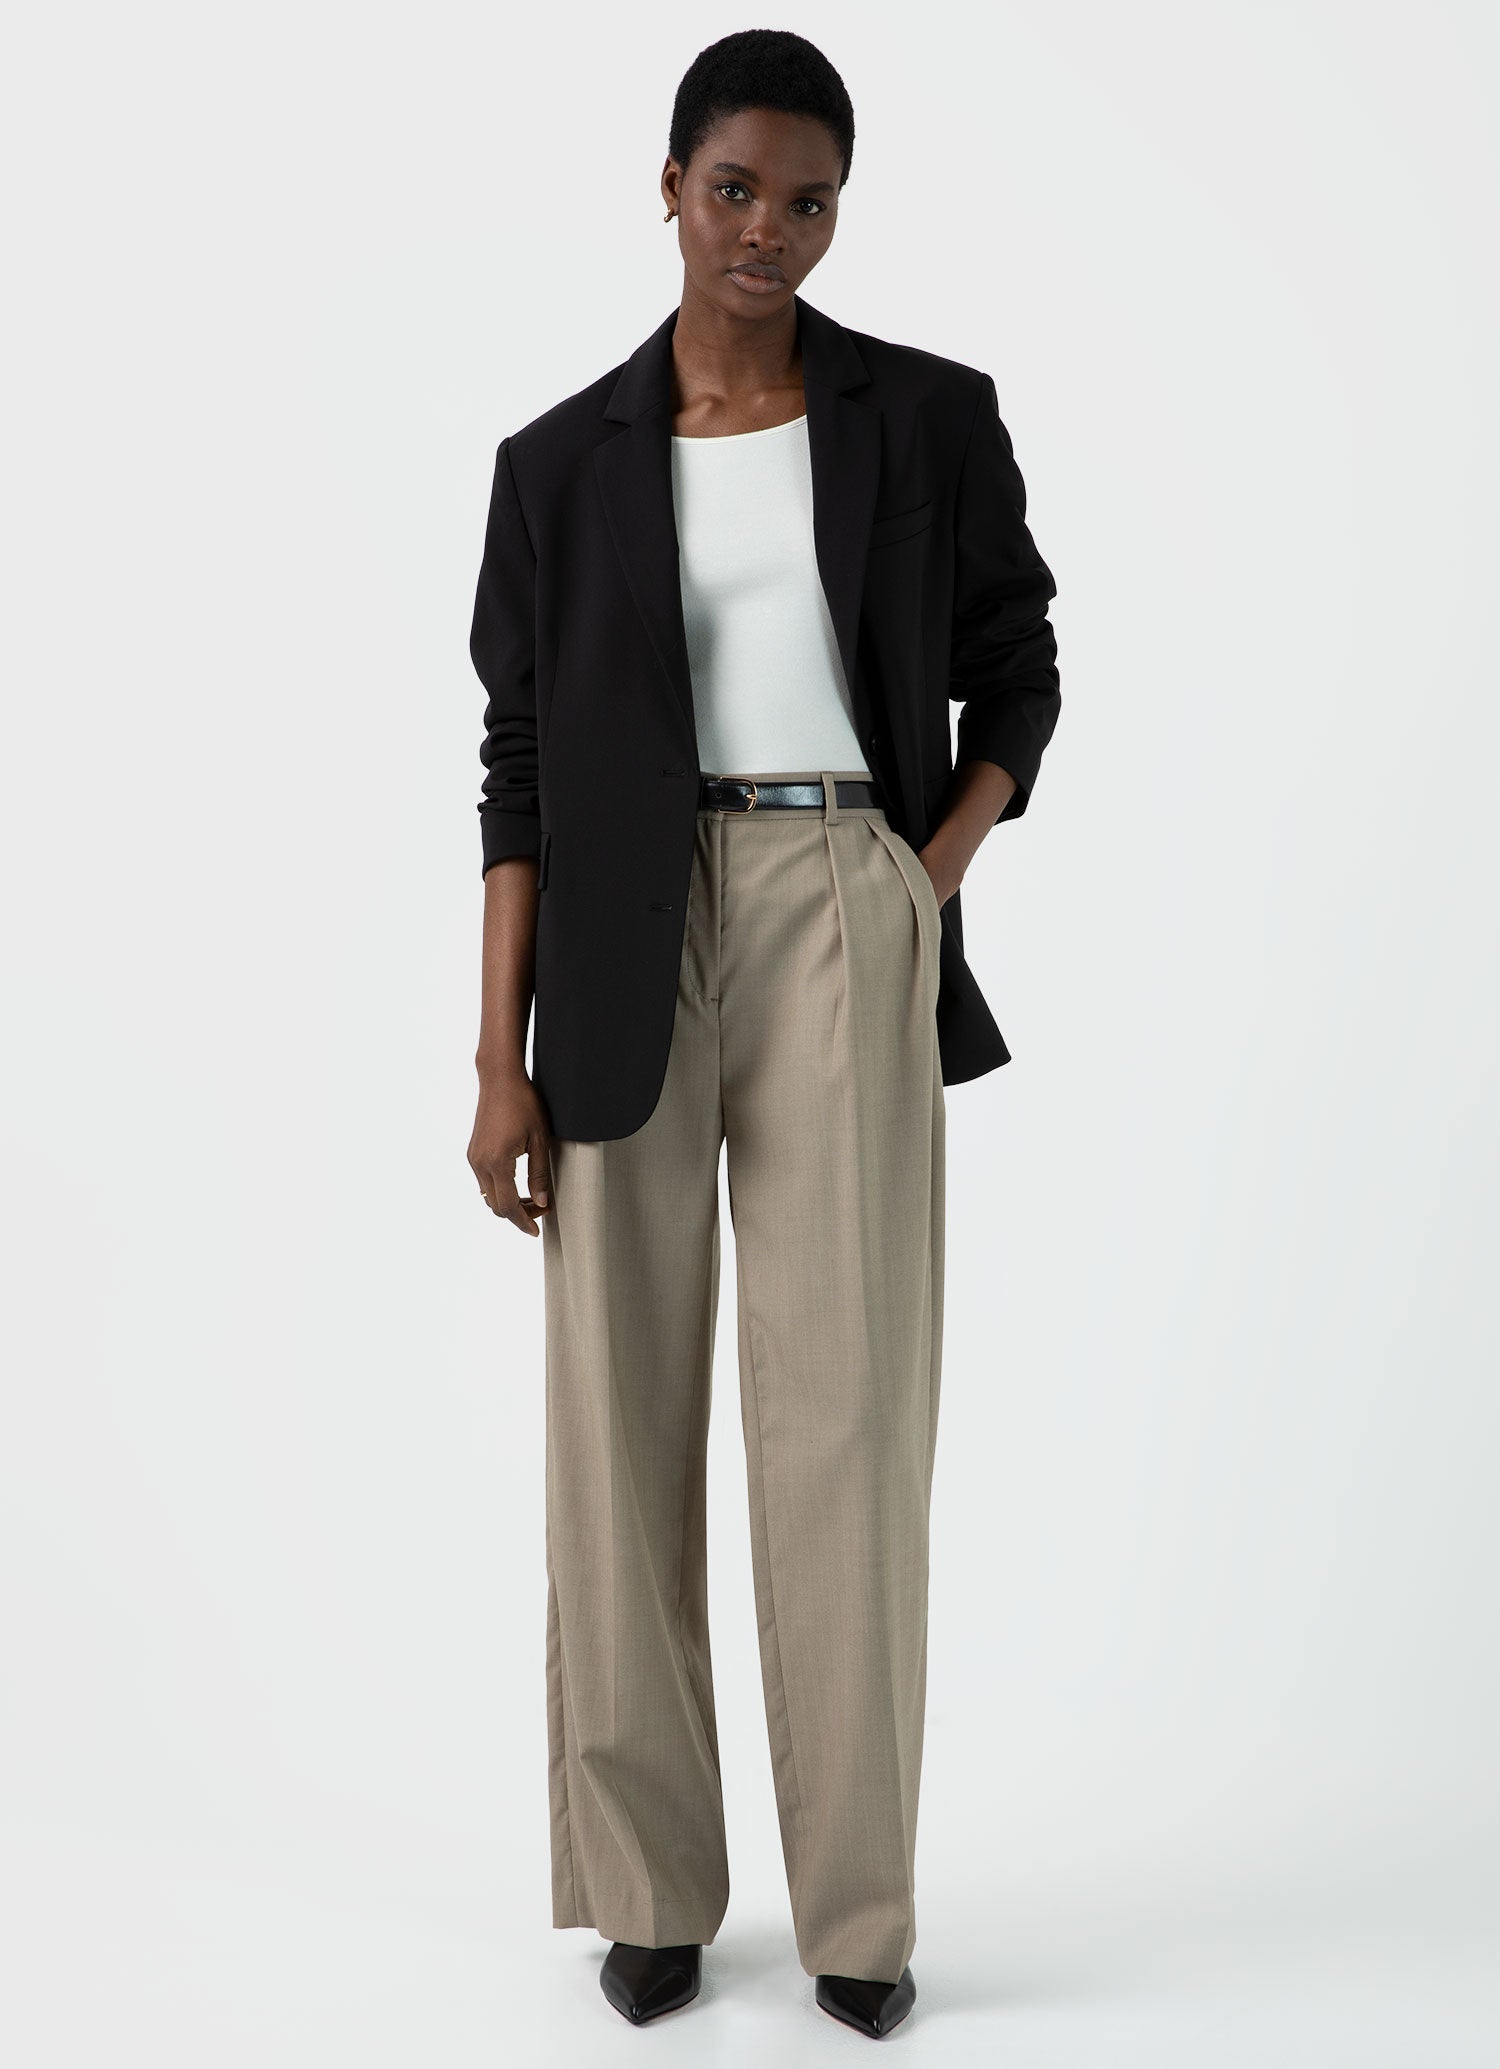 Beauty 'n Fashion: Wide twill trousers – the good, the fab & the lovely